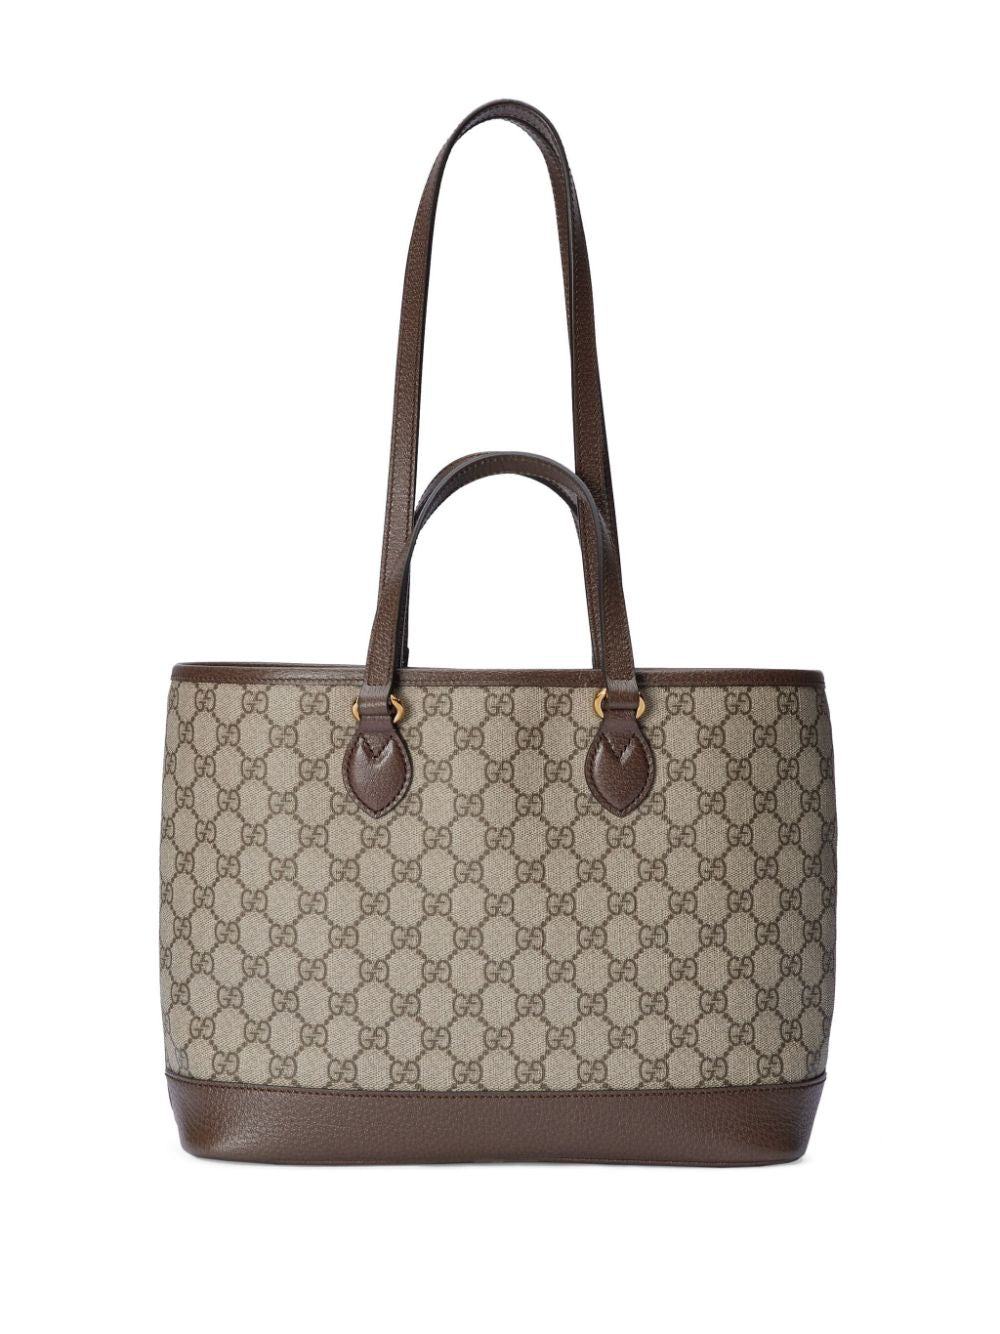 GUCCI Elegant Mini Tan Shopping Handbag with Gold-Tone Accents and Brown Leather Trim, 31x25x13 cm